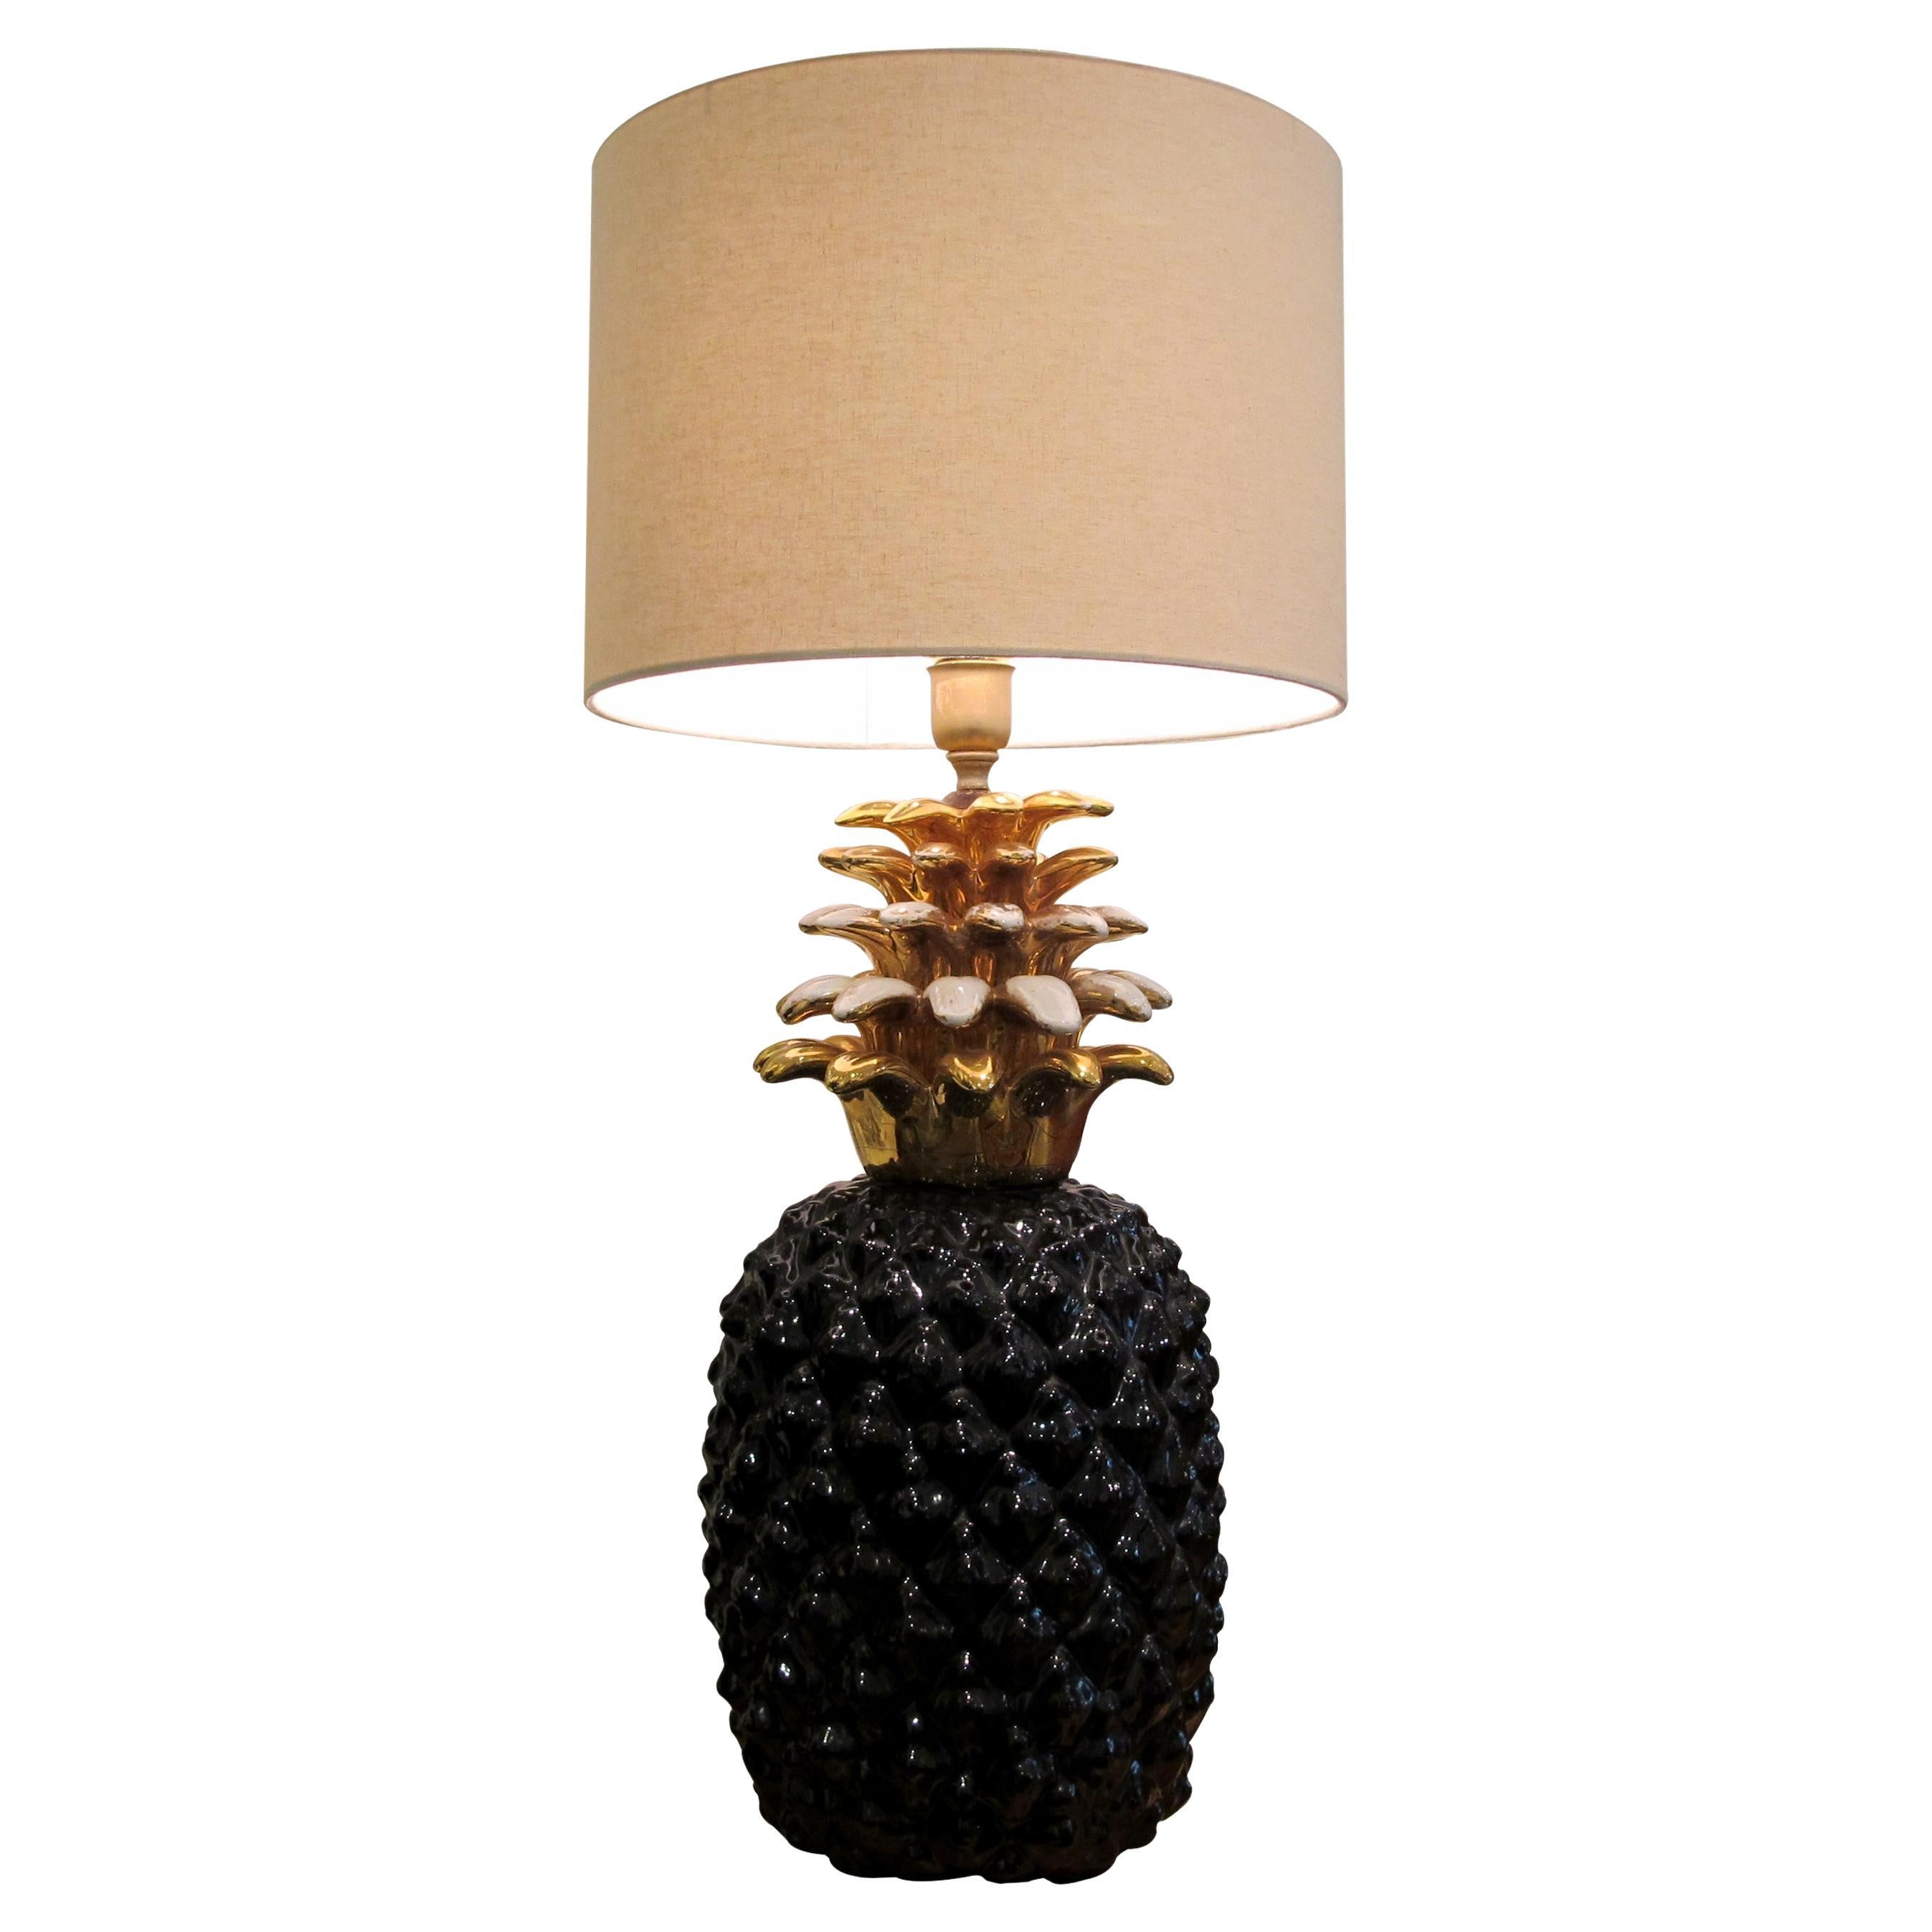 1970s Large Ceramic Black and Gold Pineapple French Lamp, Maison Lancel For Sale